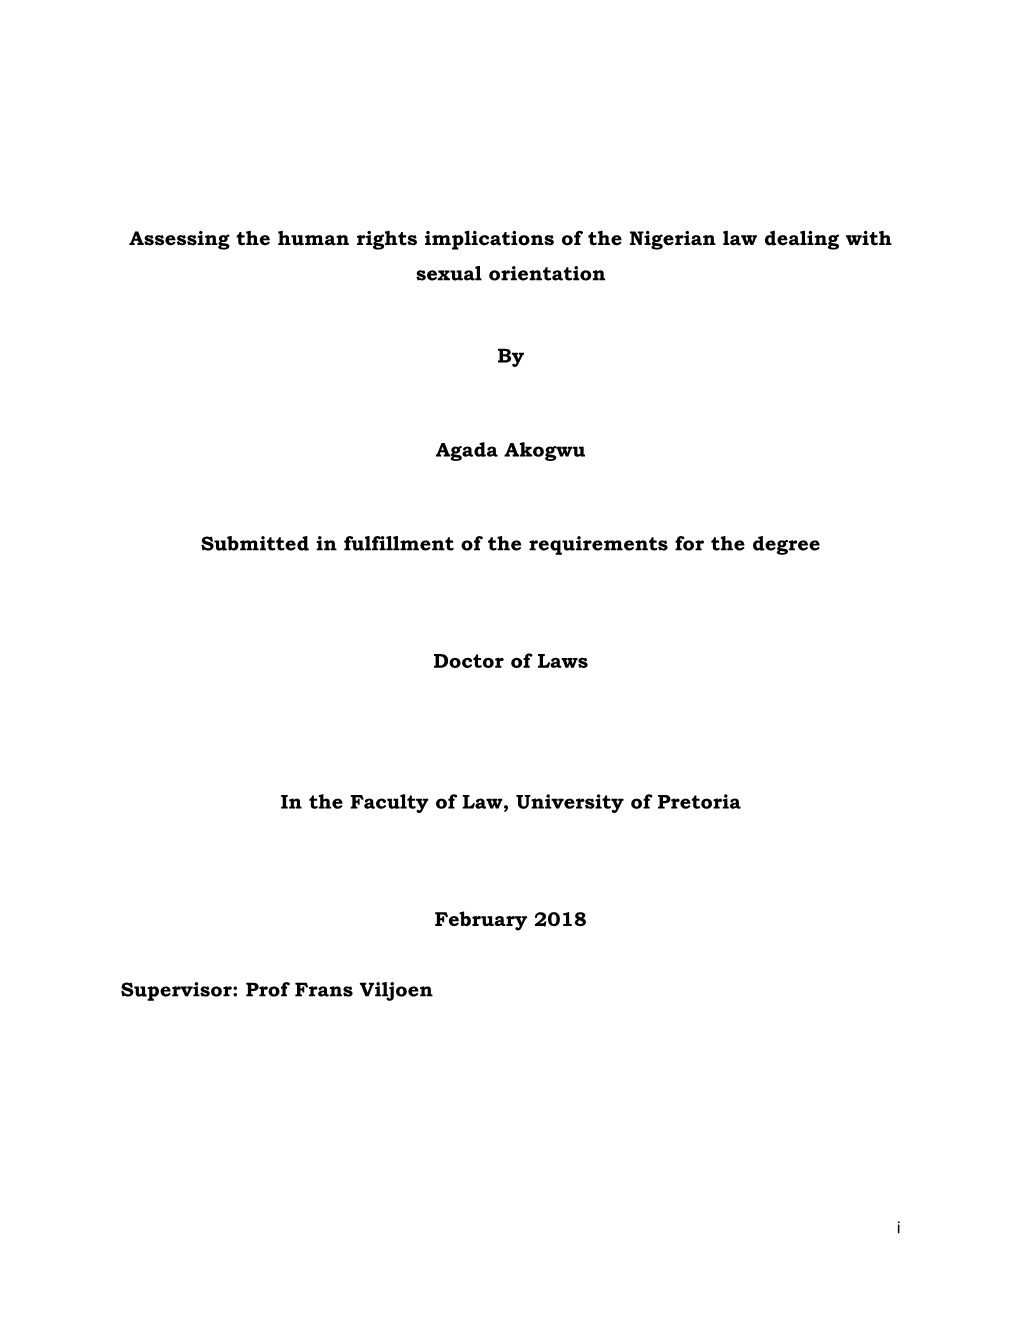 Assessing the Human Rights Implications of the Nigerian Law Dealing with Sexual Orientation